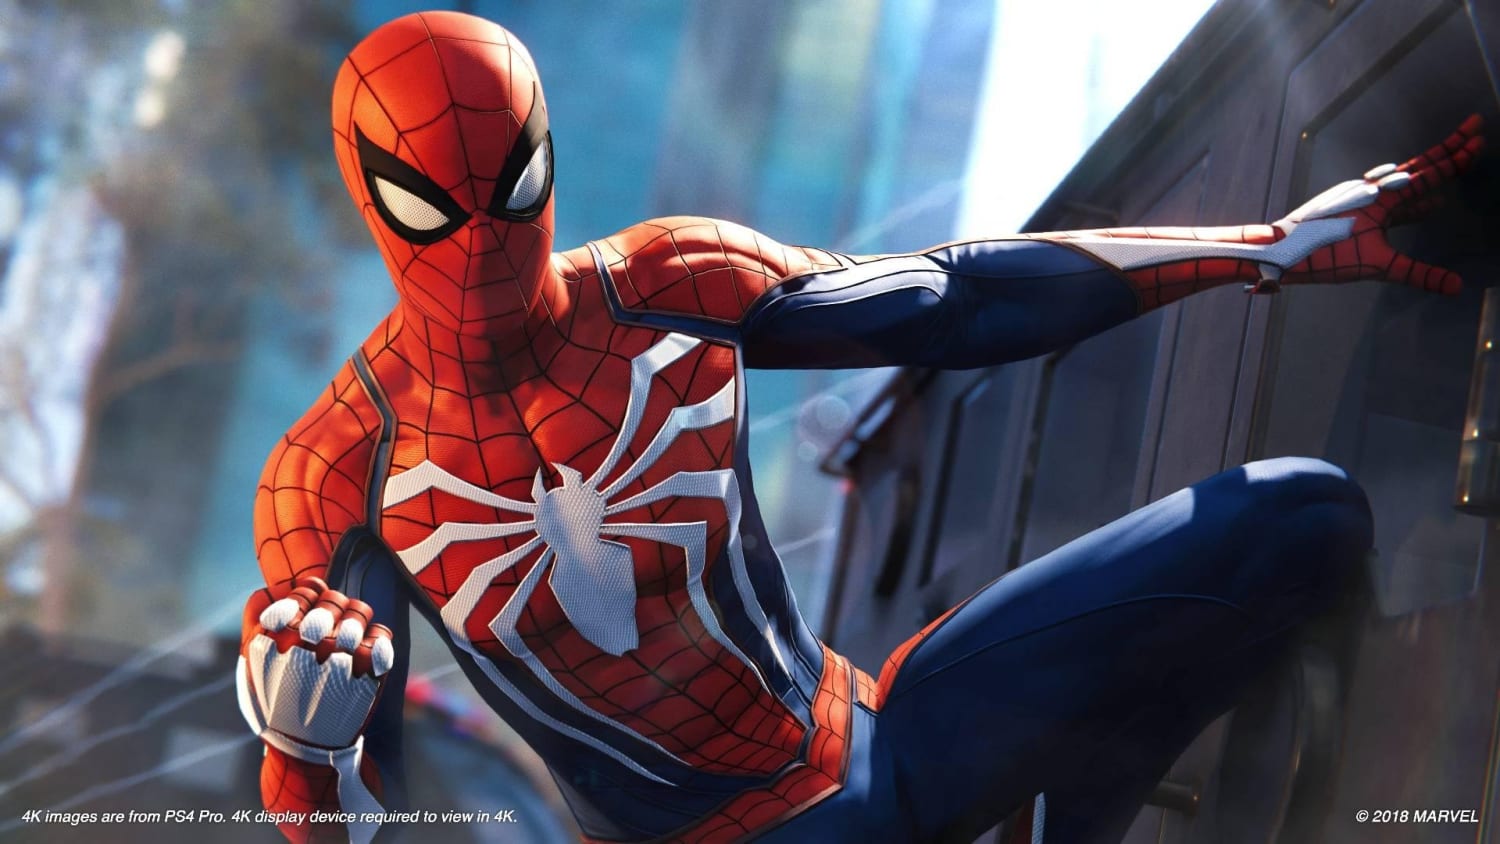 Spider-Man PS4 hands-on preview: 6 things we want